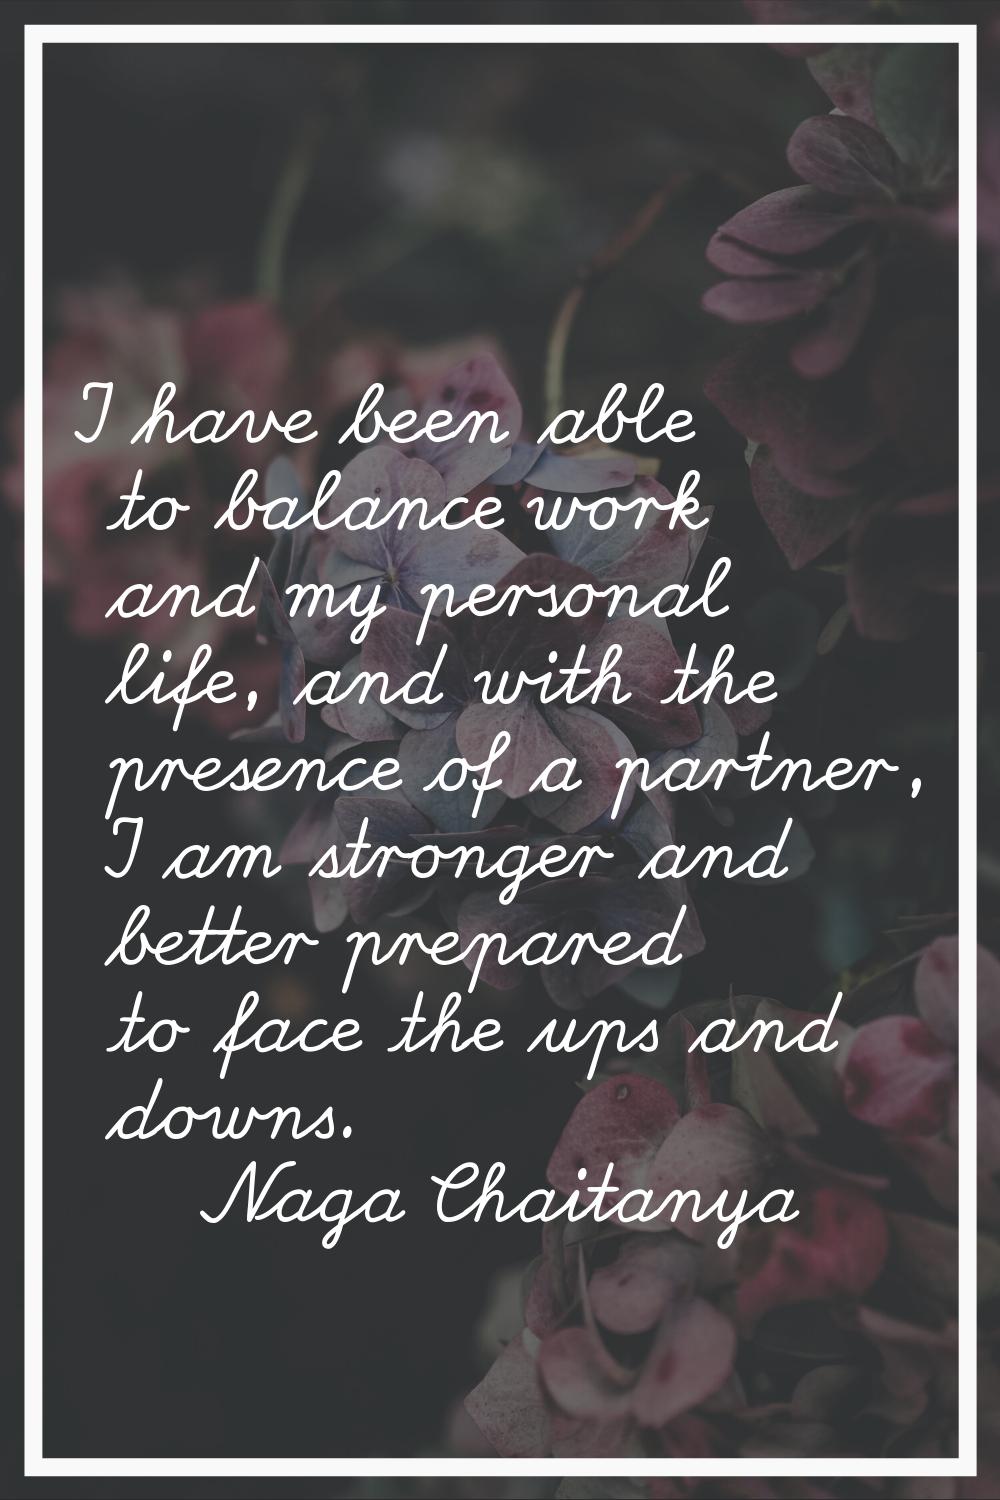 I have been able to balance work and my personal life, and with the presence of a partner, I am str